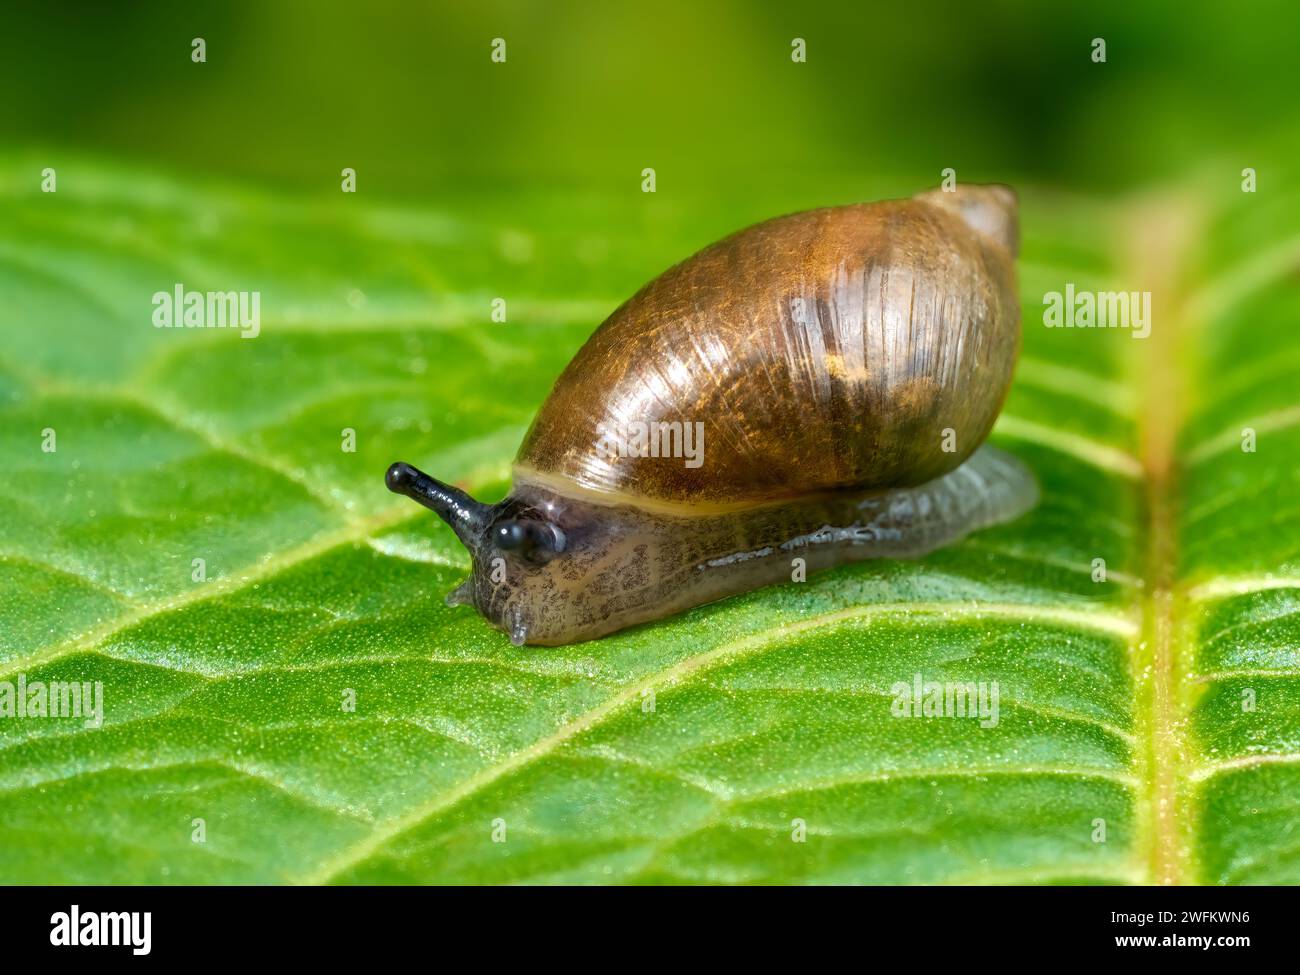 Amber snail crawling over a large green leaf Stock Photo